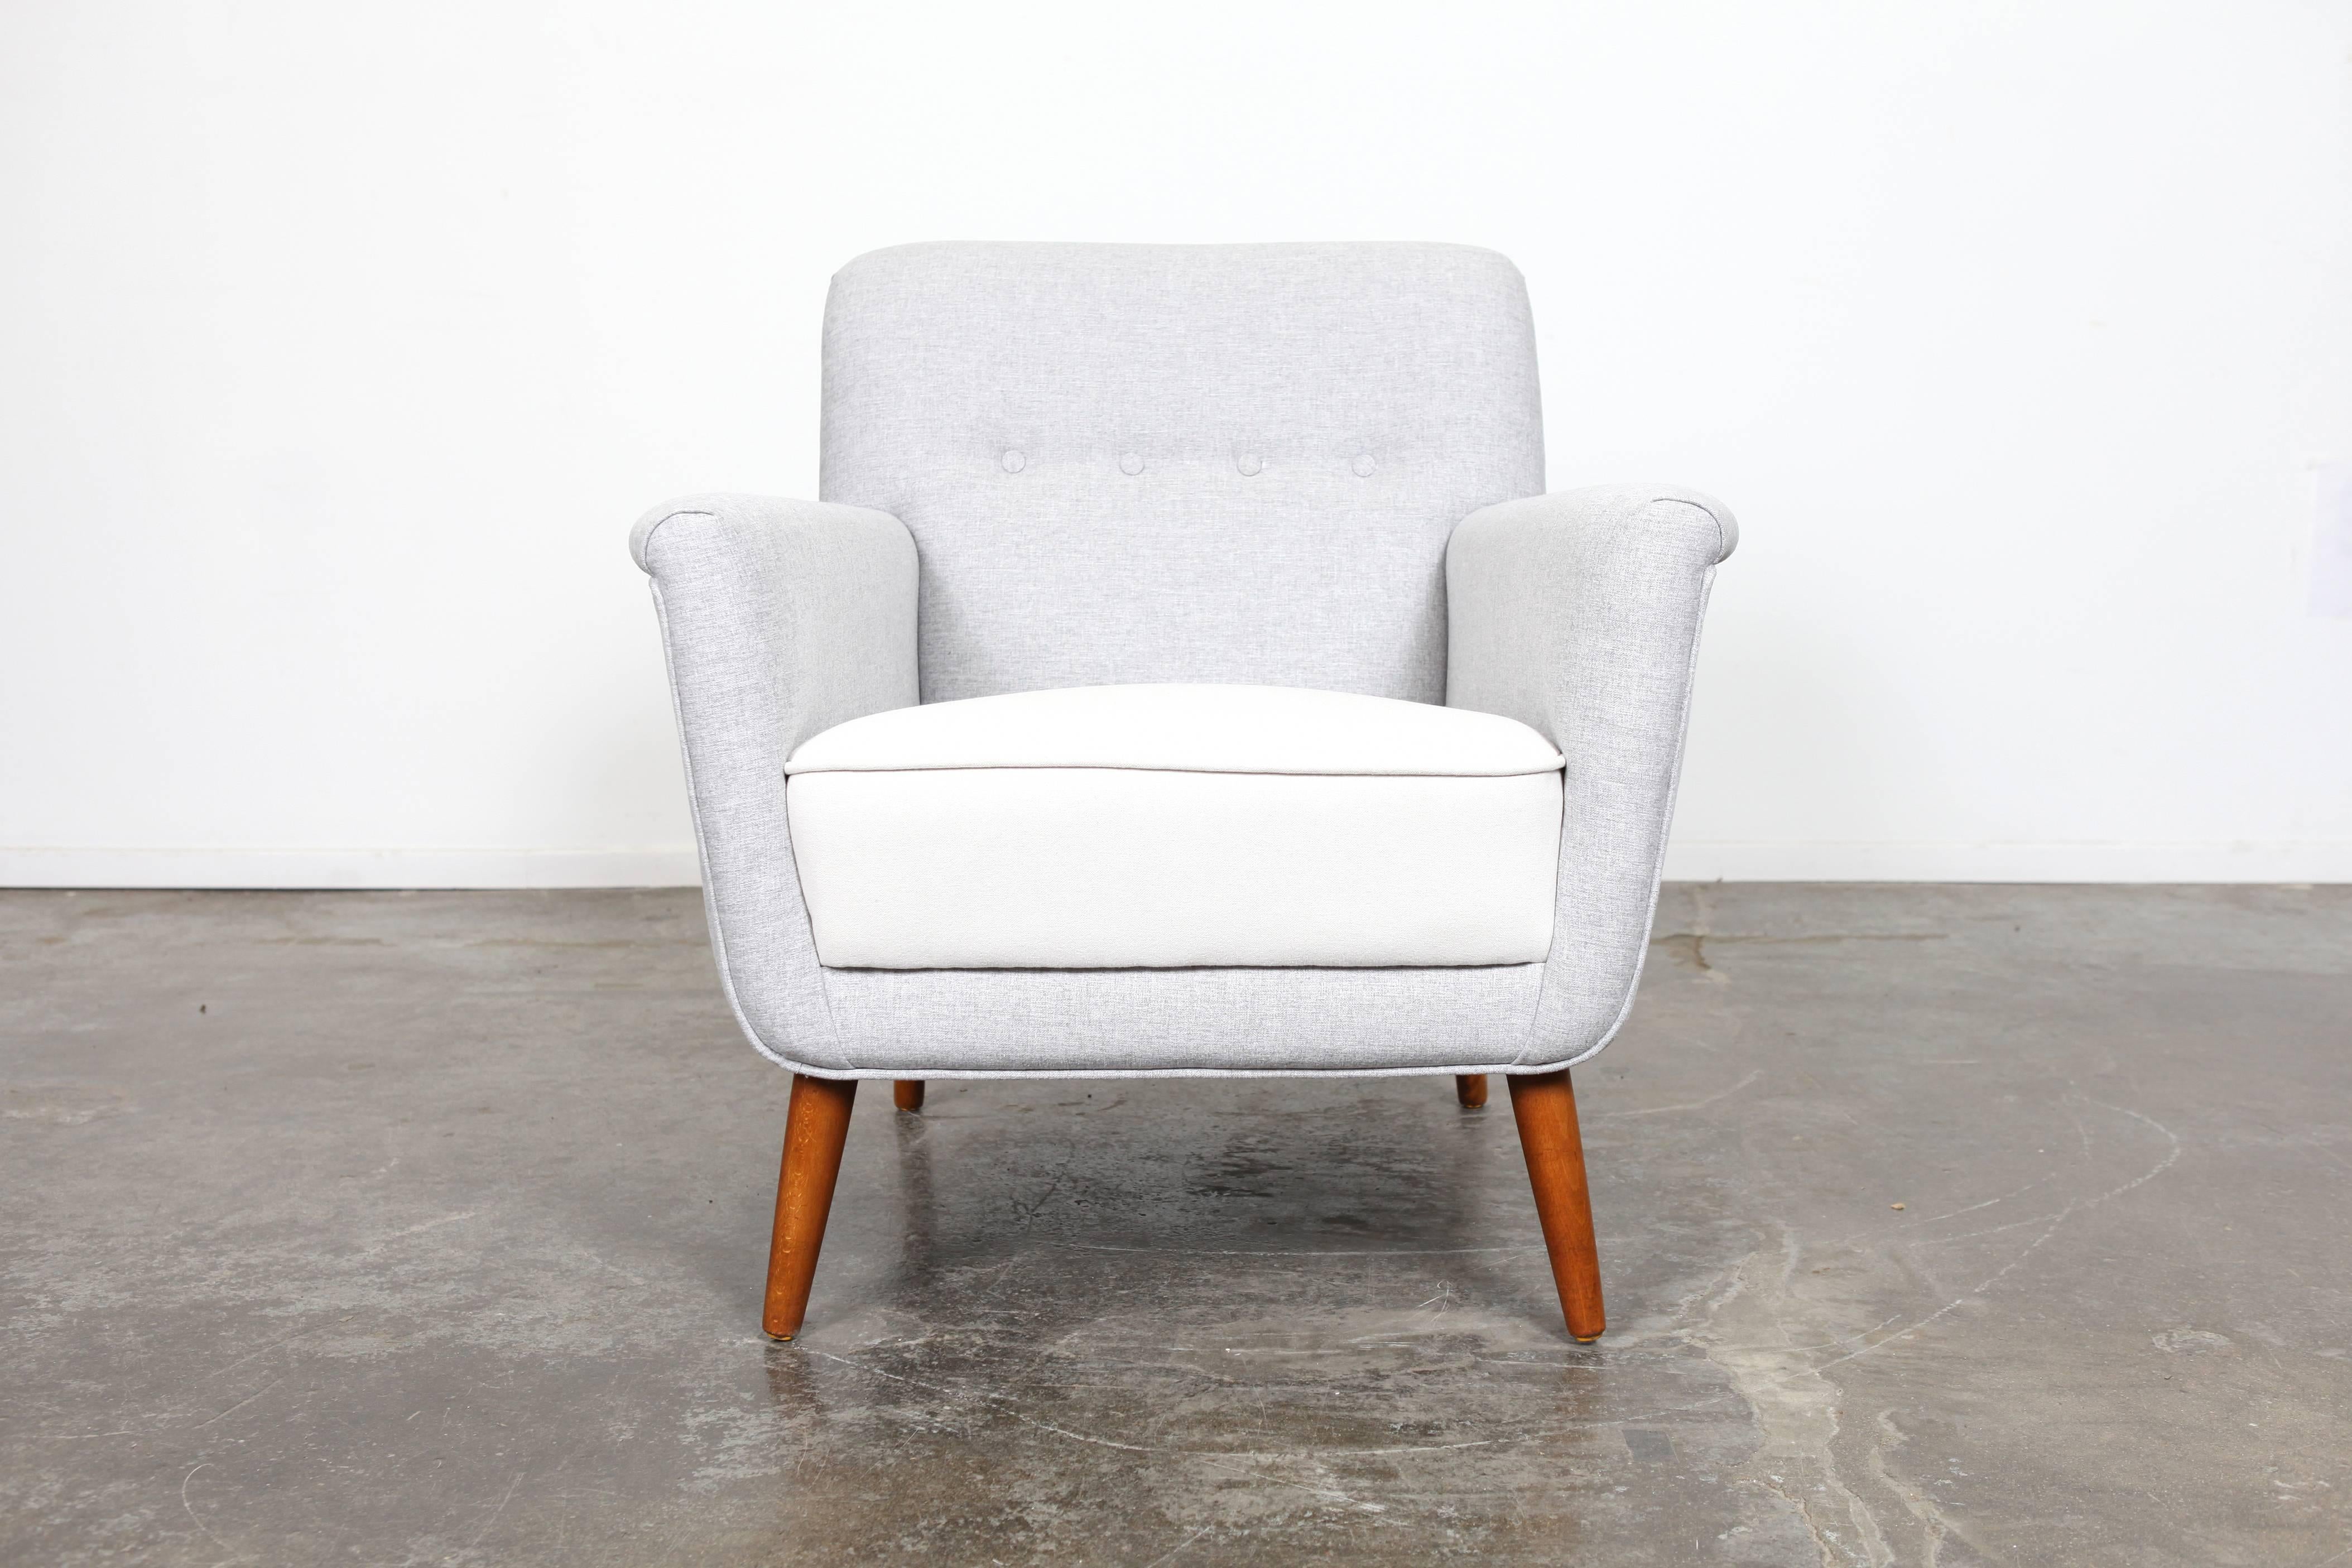 Danish Mid-Century Modern tufted lounge chair with tight back and seat, newly upholstered.